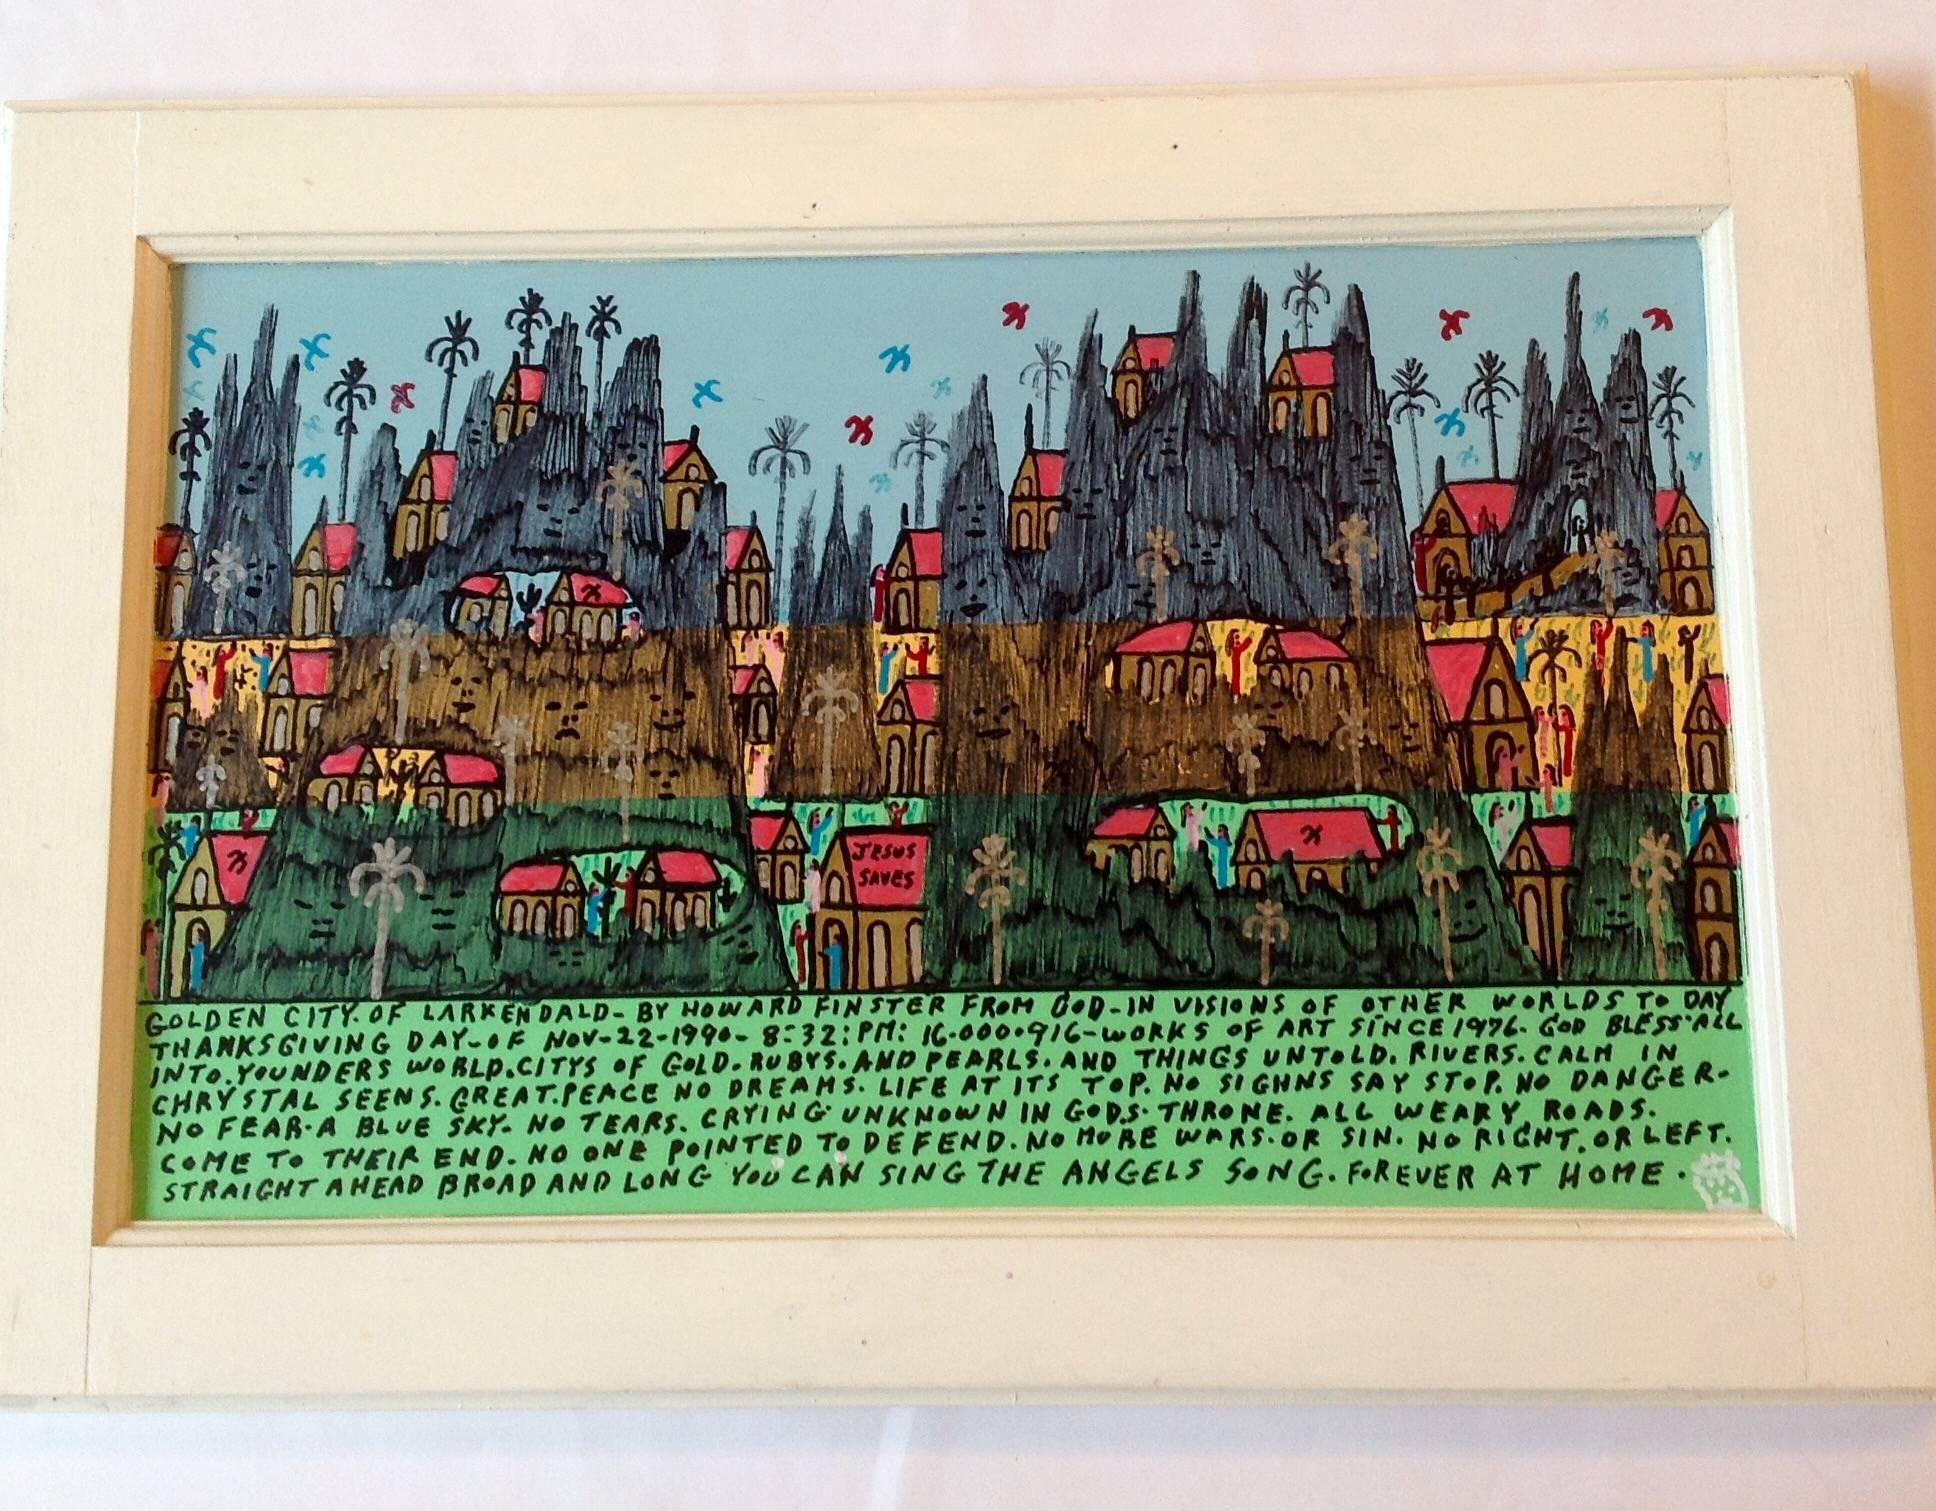 Dual-sided oil on wood panel by Reverend Howard Finster. Signature on the verso. The title reads: Golden City of Larken Dald by Howard Finster from God in visions of other worlds today Thanksgiving day, November 22, 1990 8:32 PM.
Archive.